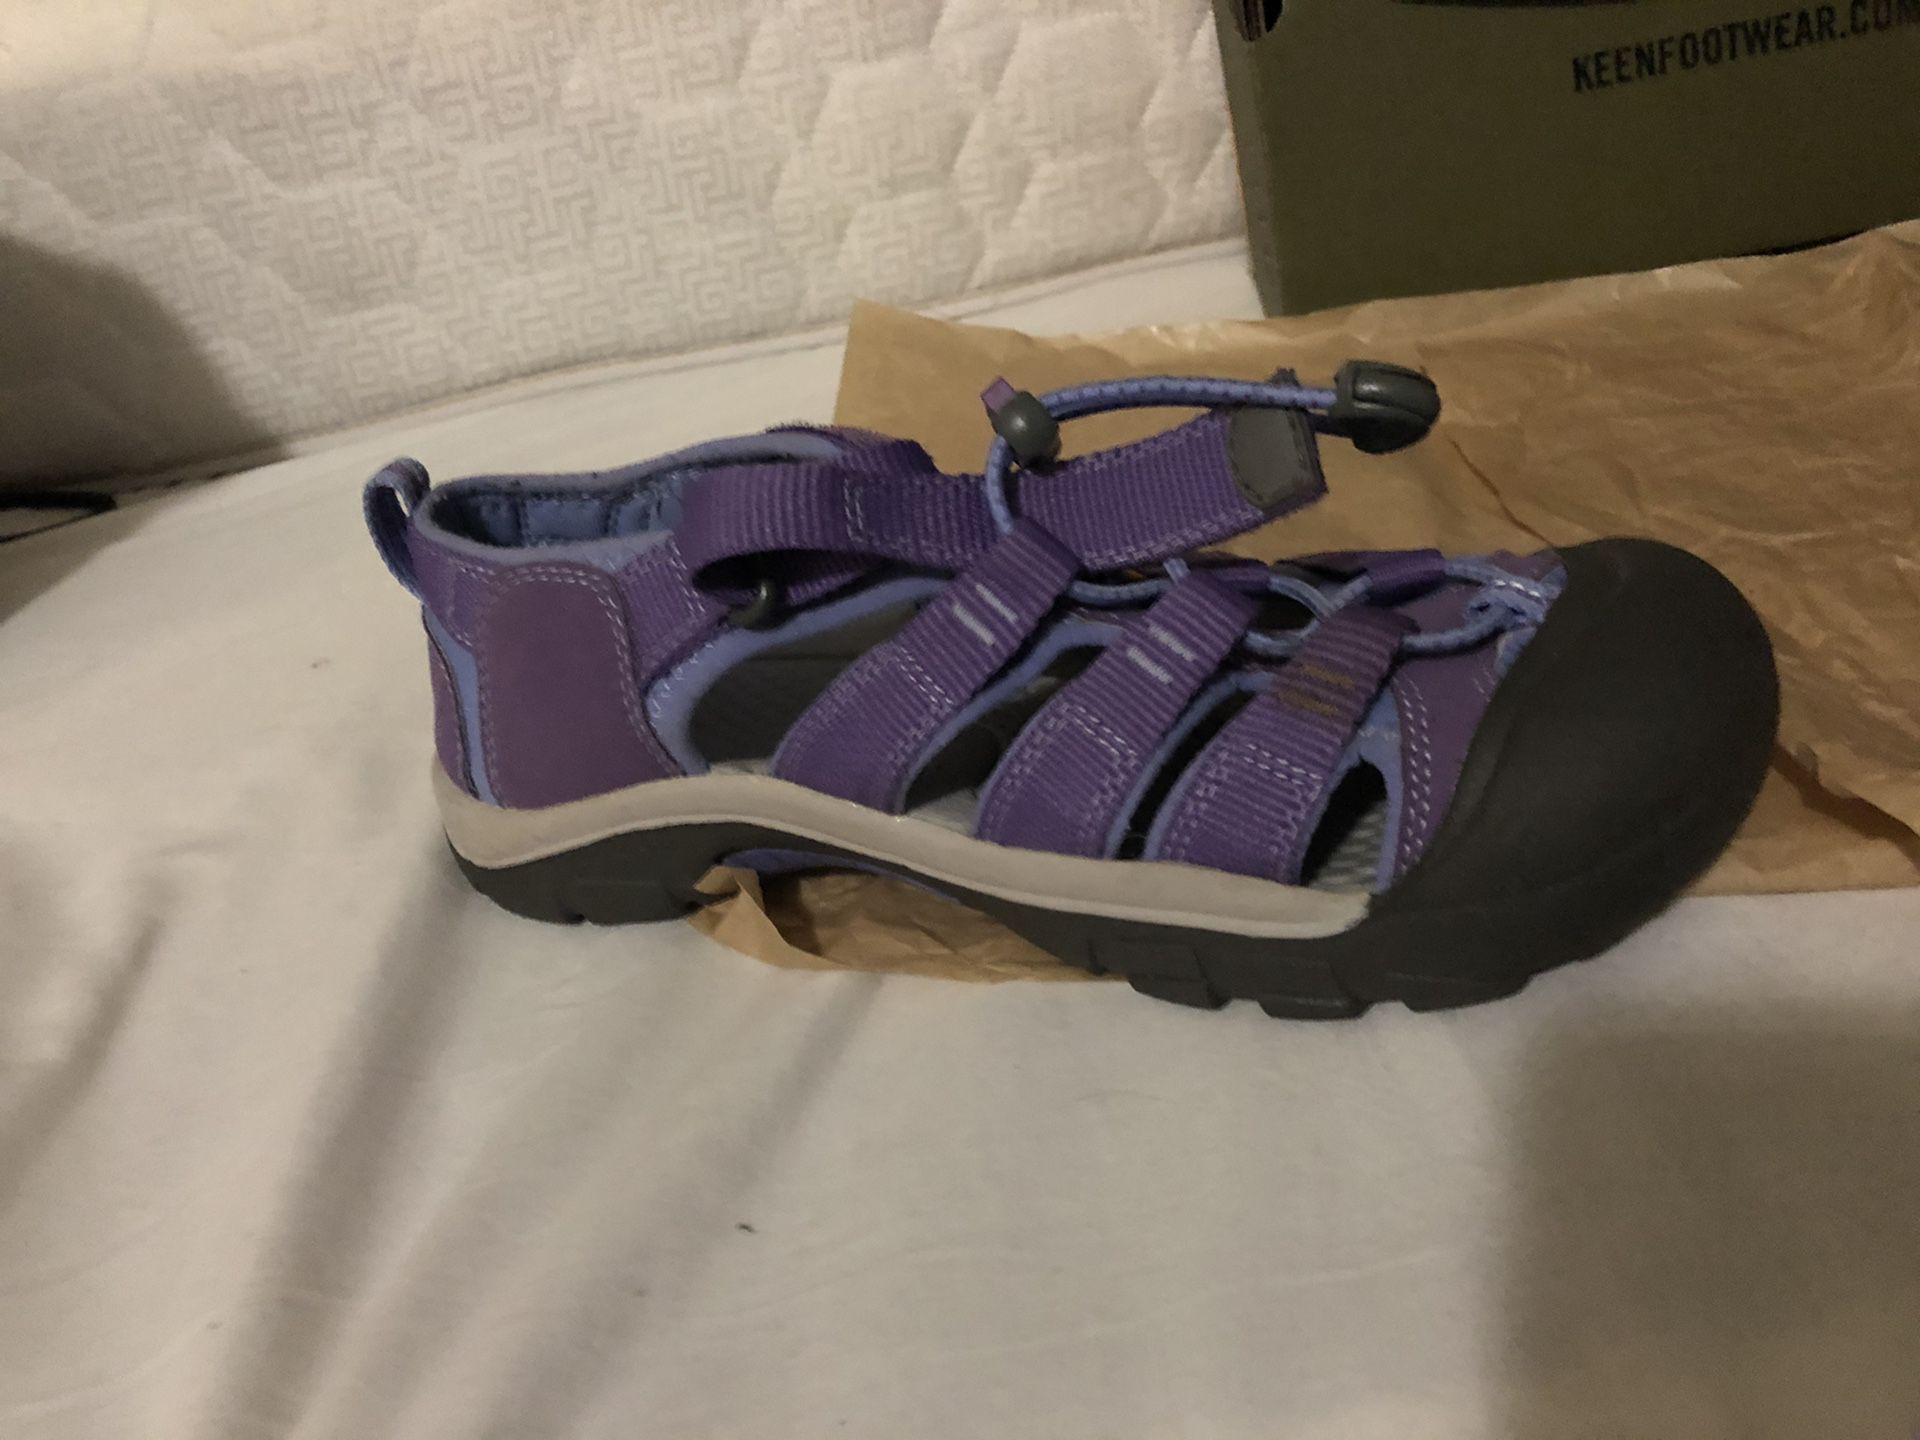 Brand new never used “Keen” tennis shoes for women size 7